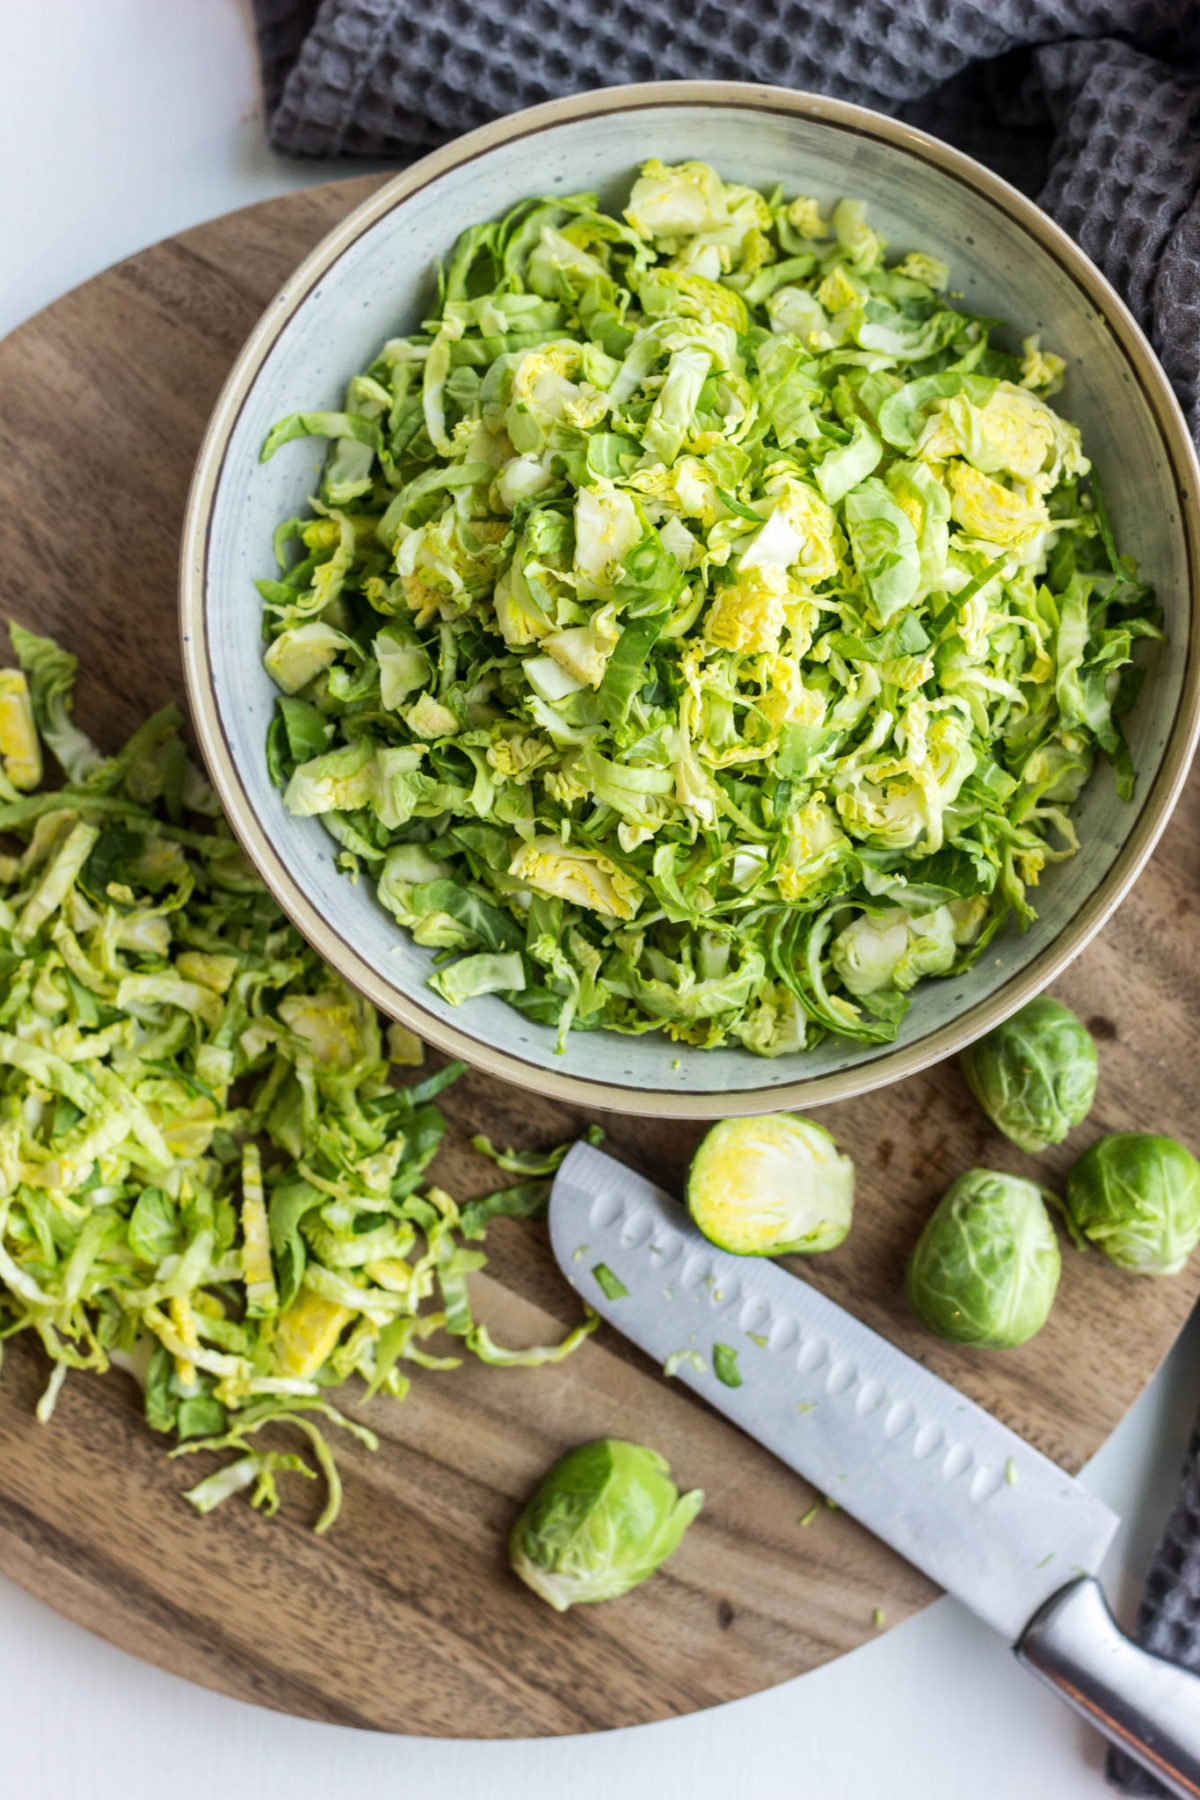 Thinly sliced Brussels sprouts in bowl on a wooden cutting board with knife and more Brussels sprouts.